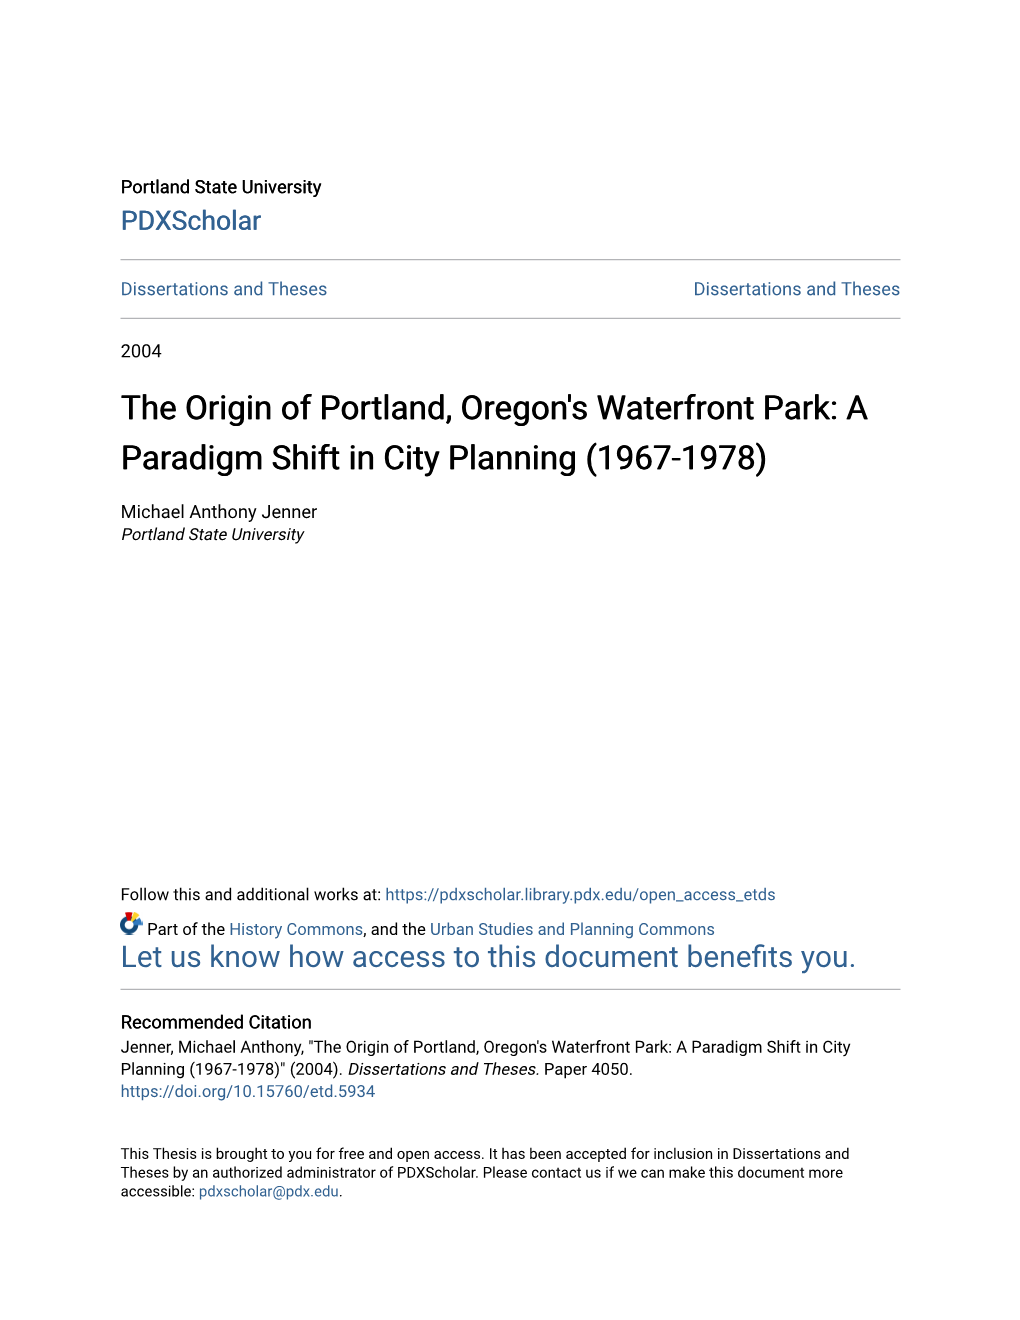 The Origin of Portland, Oregon's Waterfront Park: a Paradigm Shift in City Planning (1967-1978)